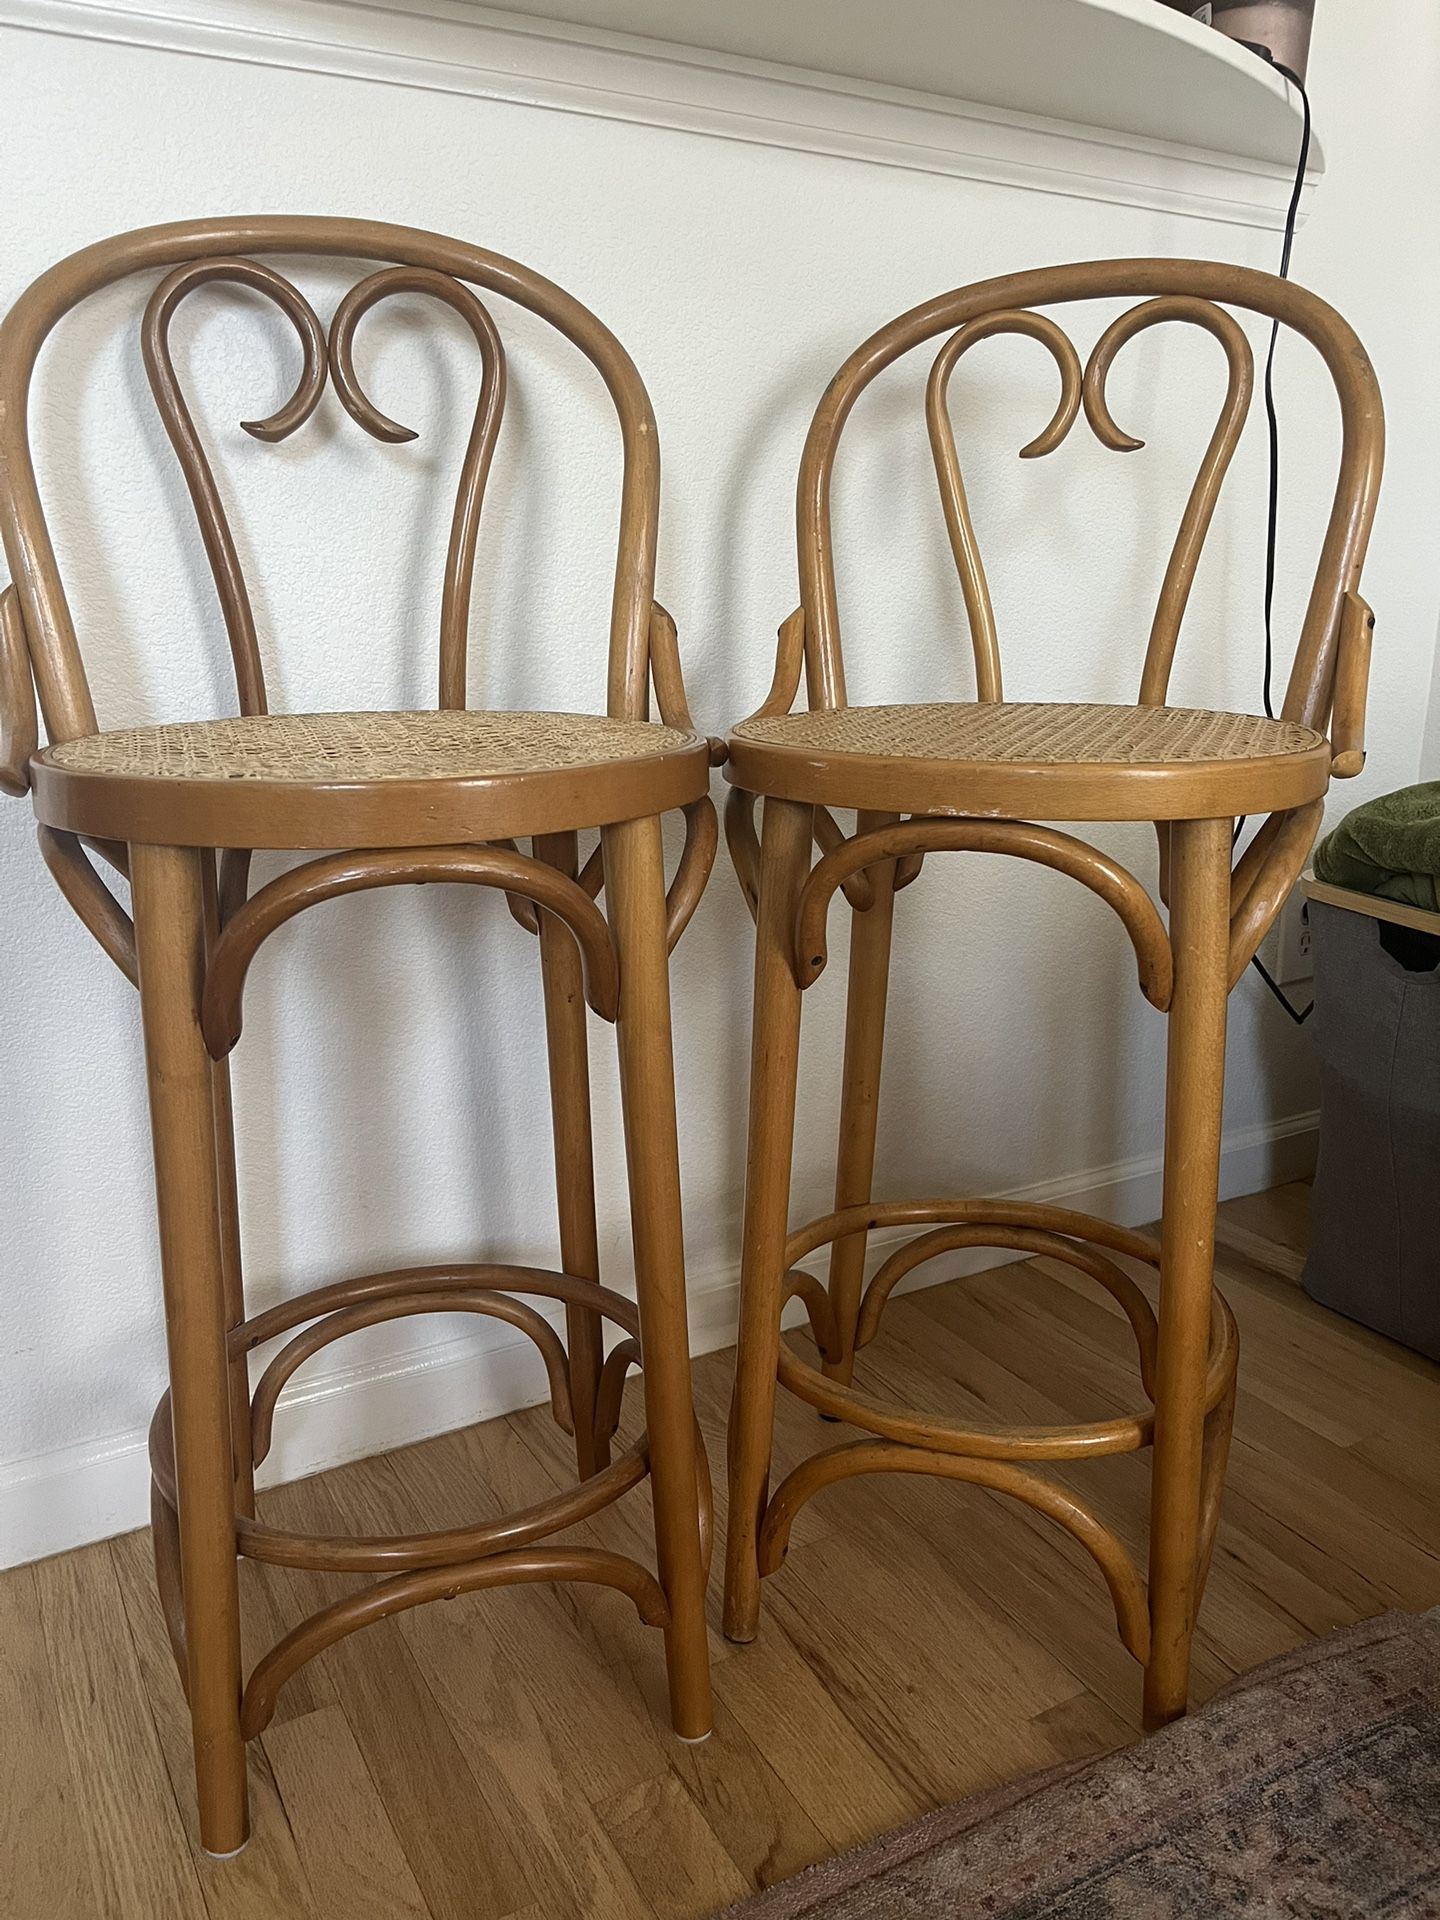 Brentwood Thonet Rattan Bar Stools witch Cane Seats  (2)